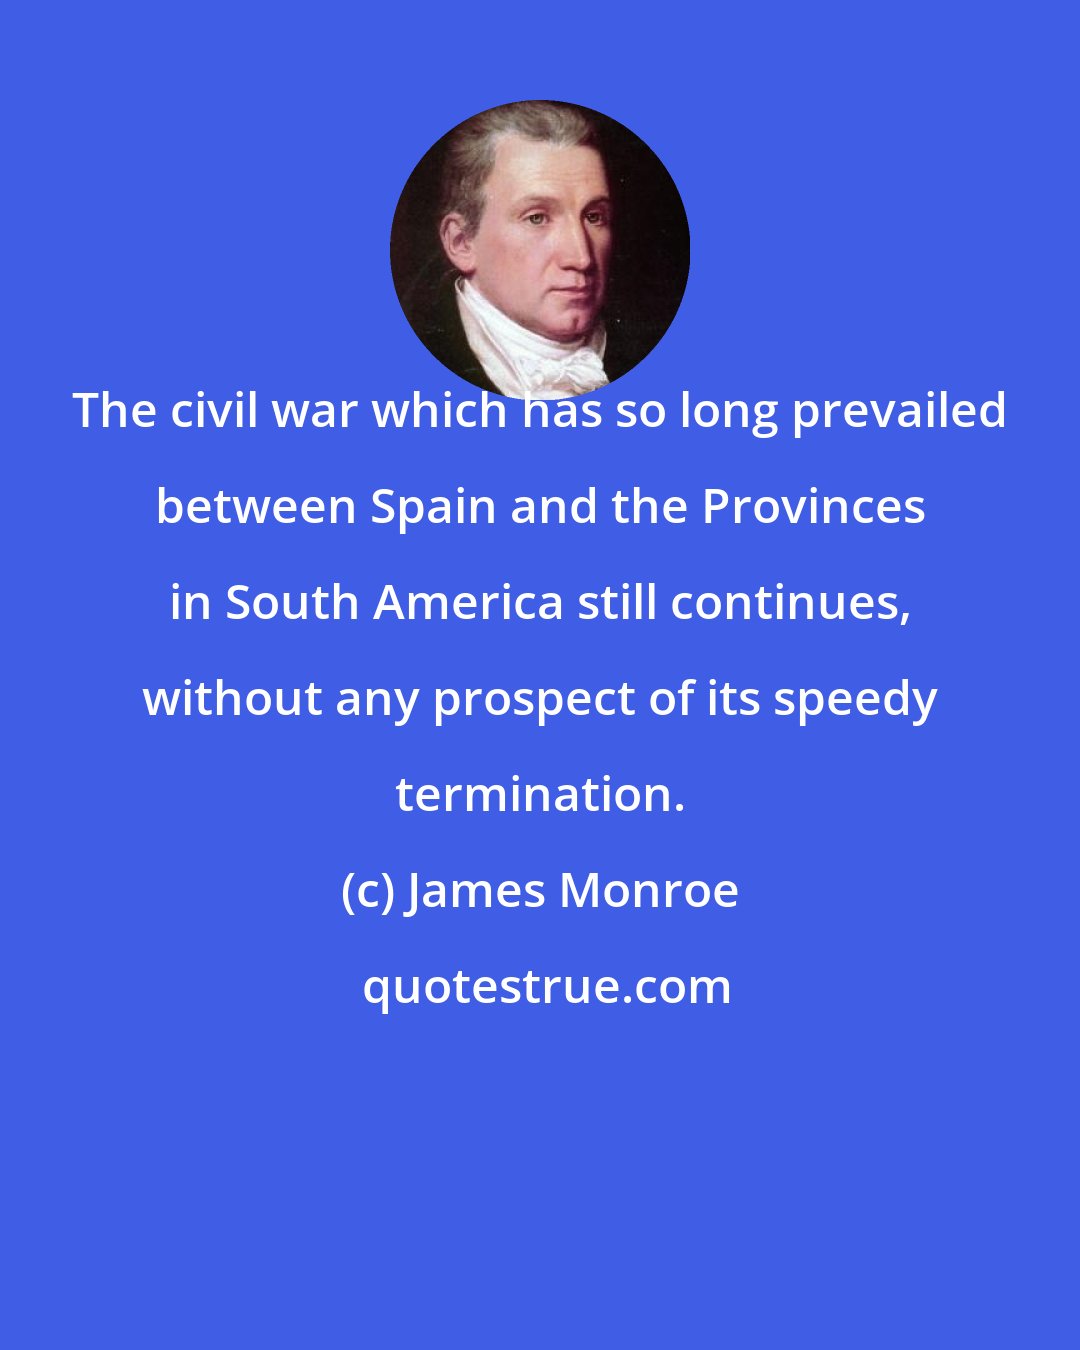 James Monroe: The civil war which has so long prevailed between Spain and the Provinces in South America still continues, without any prospect of its speedy termination.